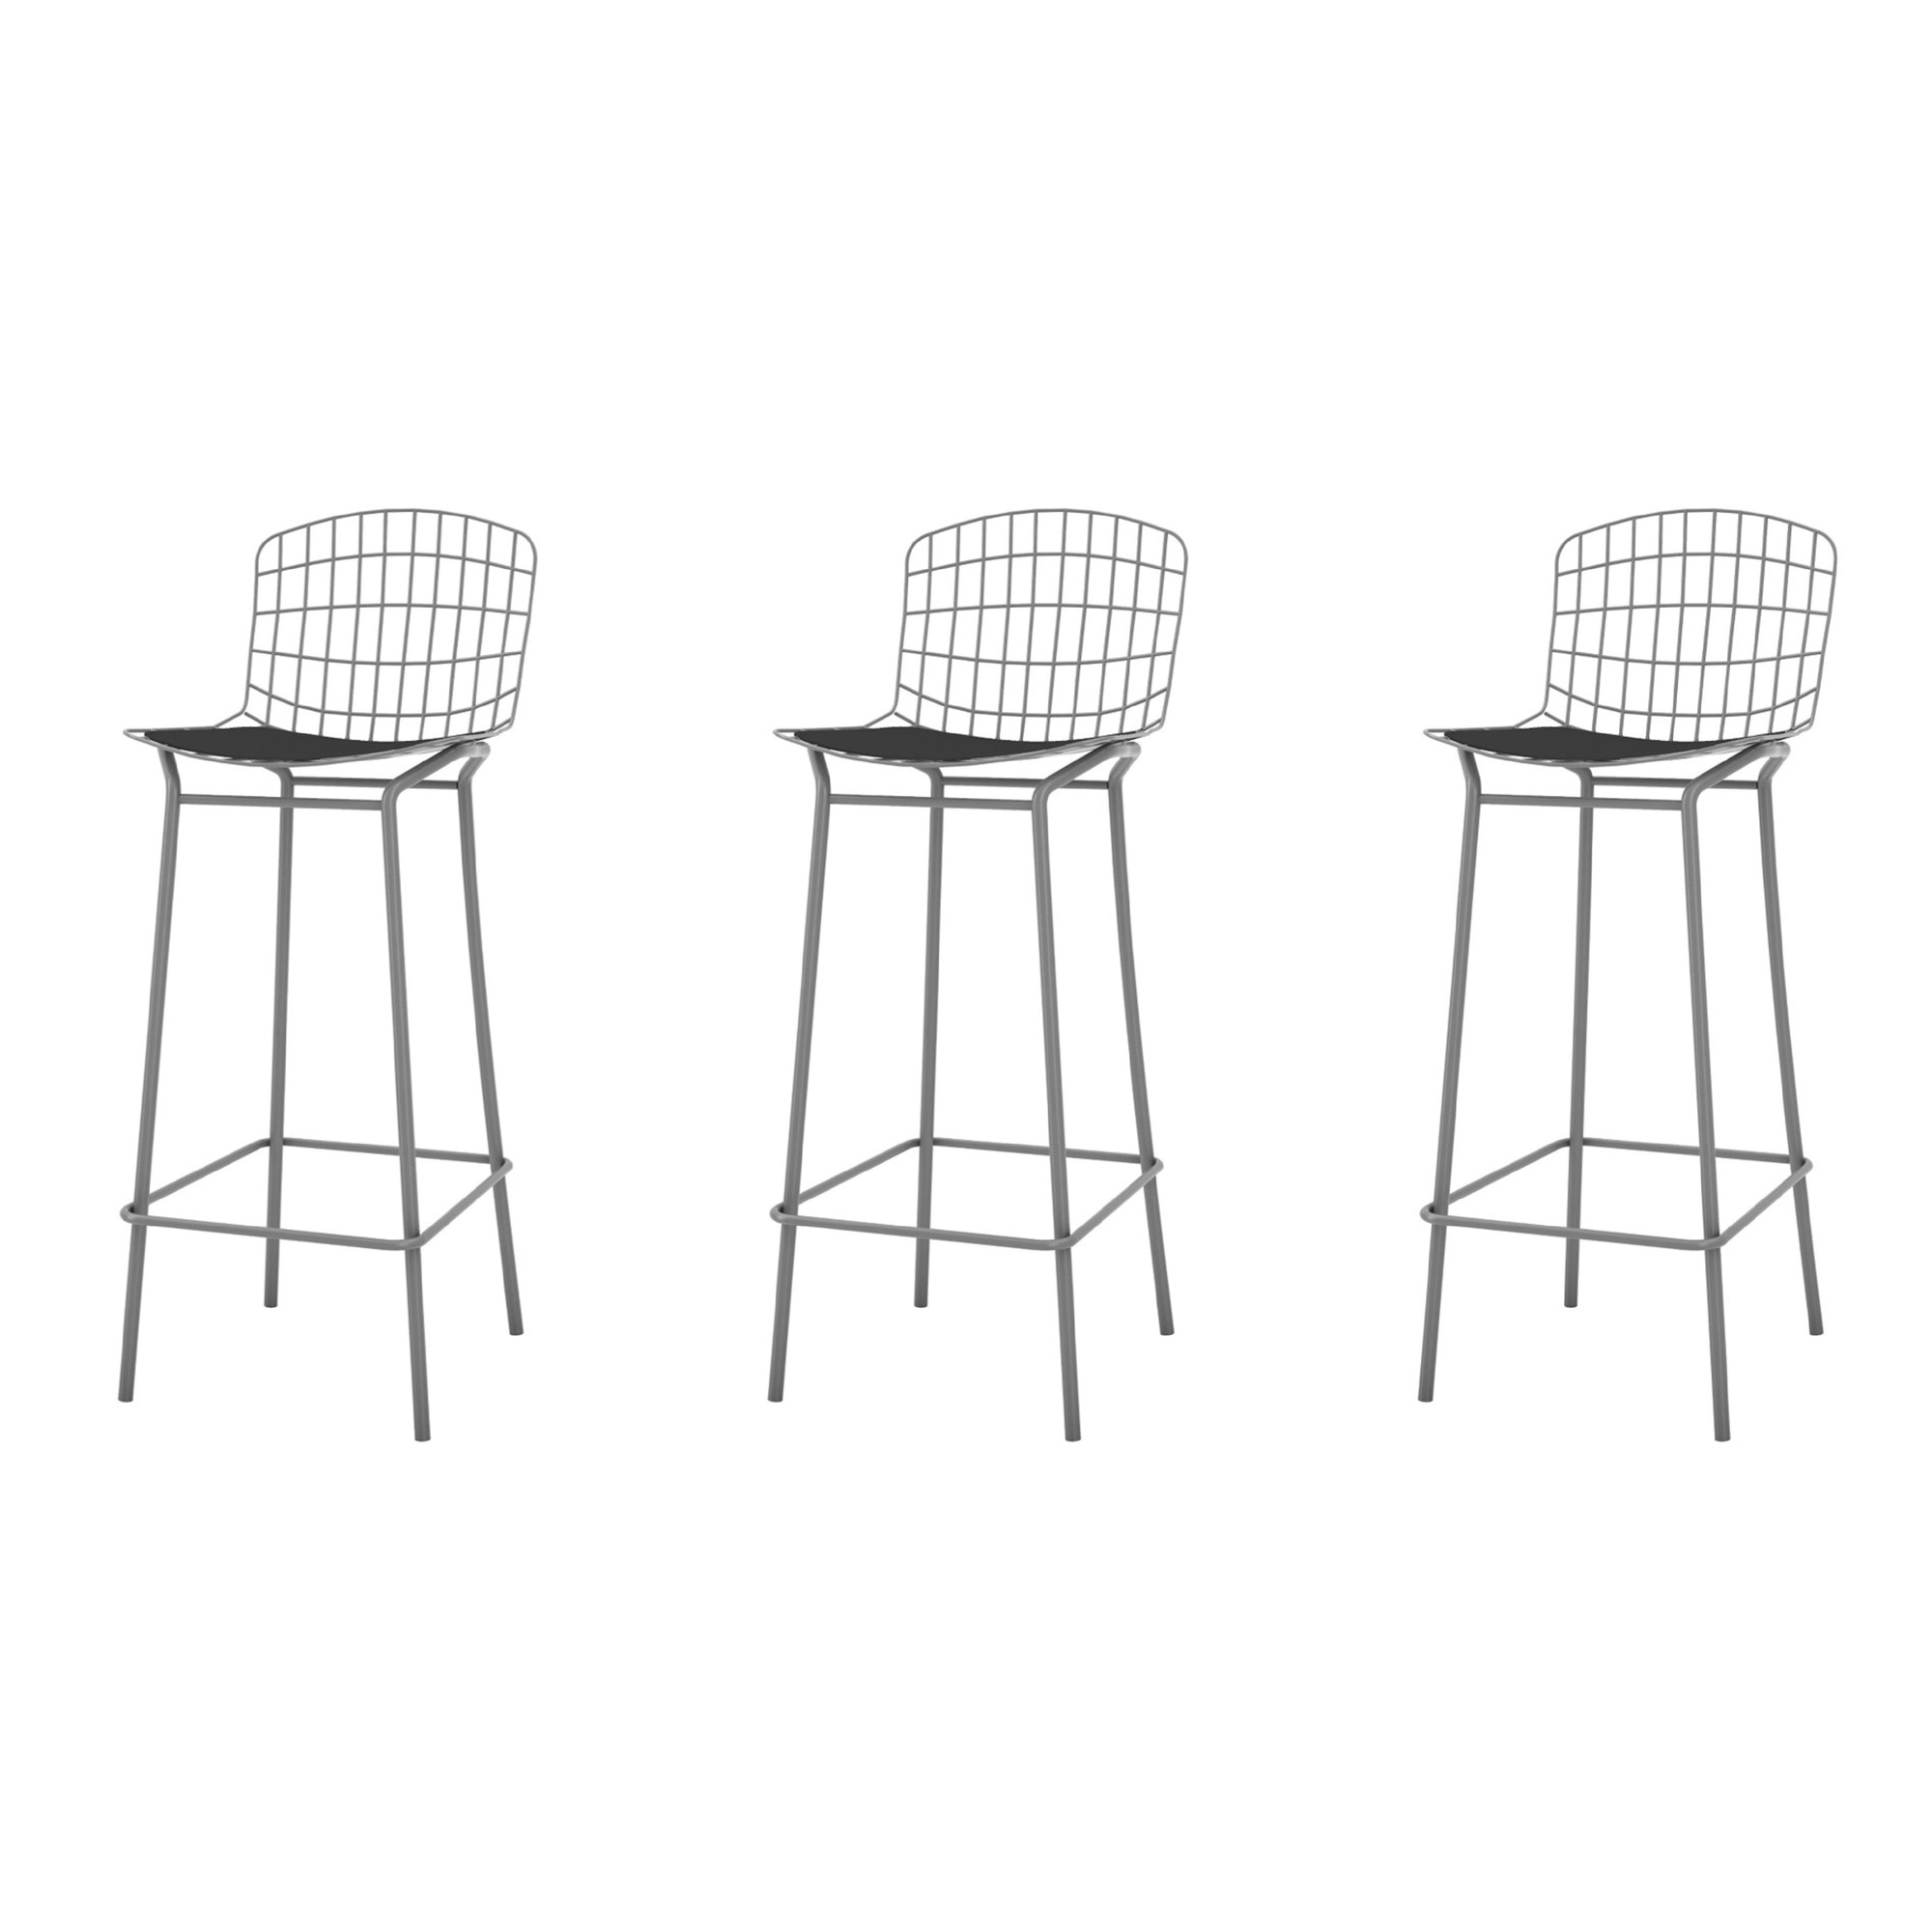 Manhattan Comfort, Madeline 41.73Inch Stool Set of 3 Cushion Charcoal, Primary Color Black, Included (qty.) 3 Model 3-198AMC